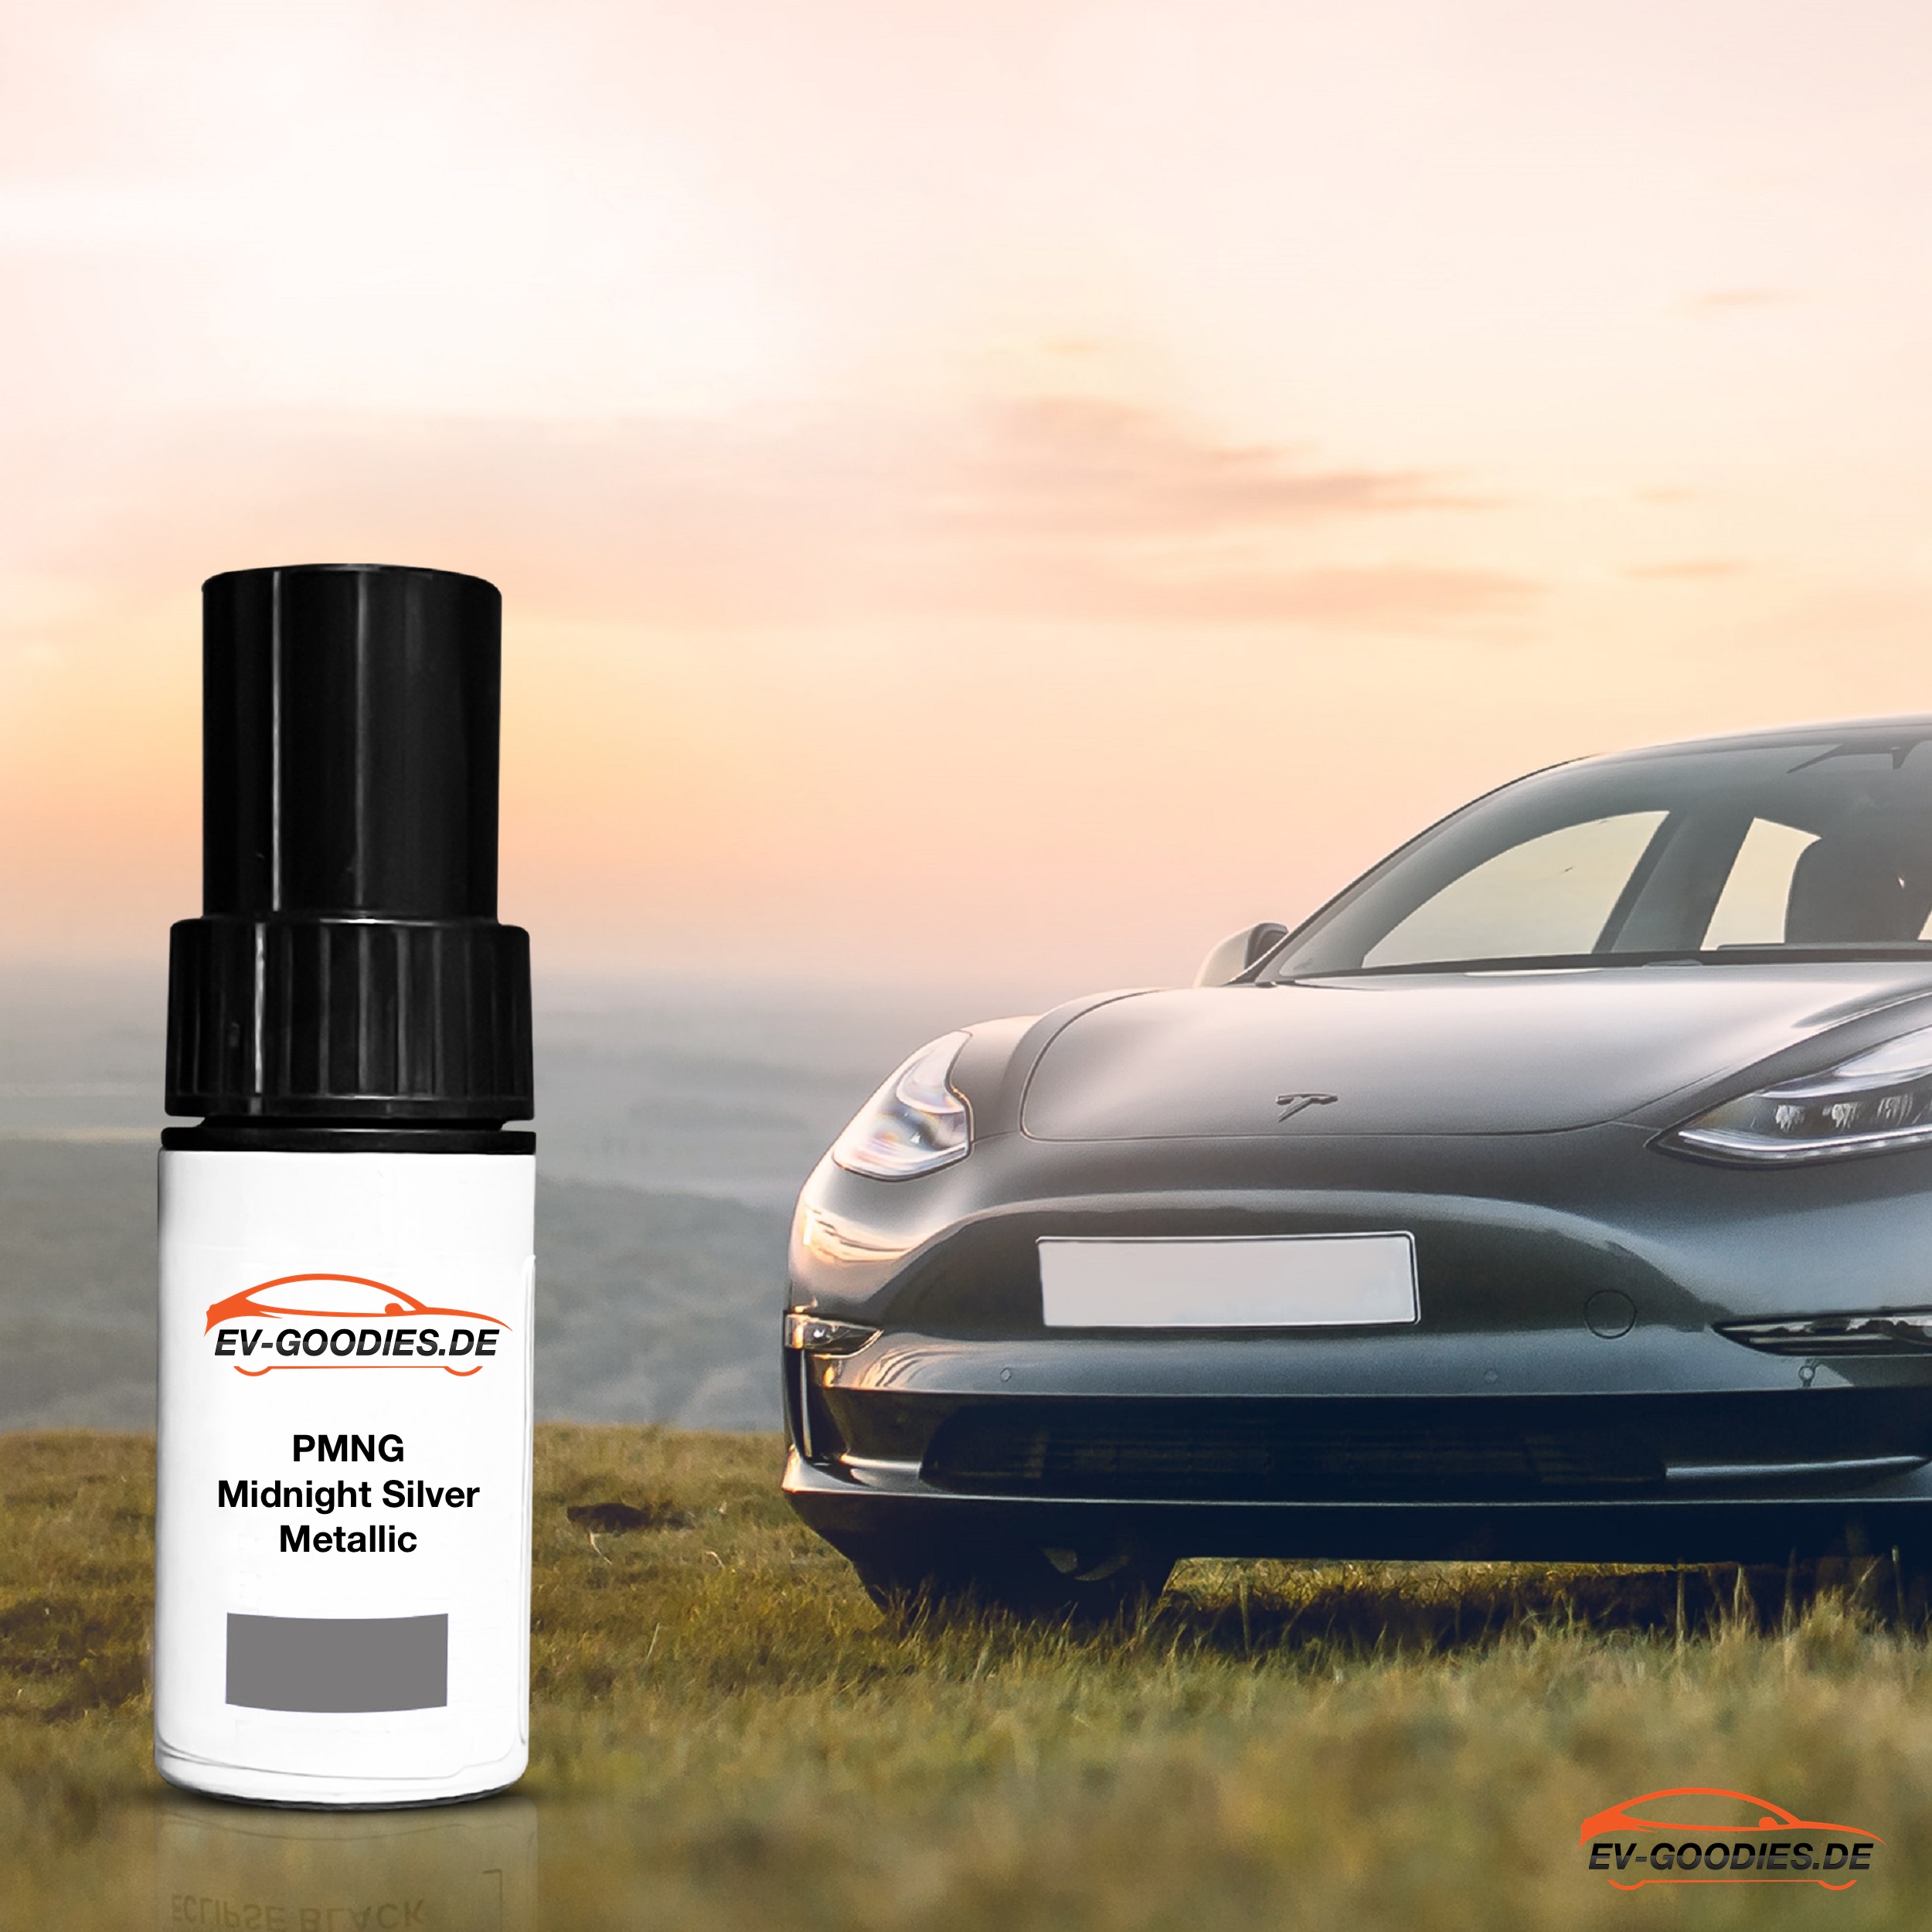 Paint brush gray Midnight Silver Metallic for Tesla Model 3, color code: PMNG, paint repair, stone chips